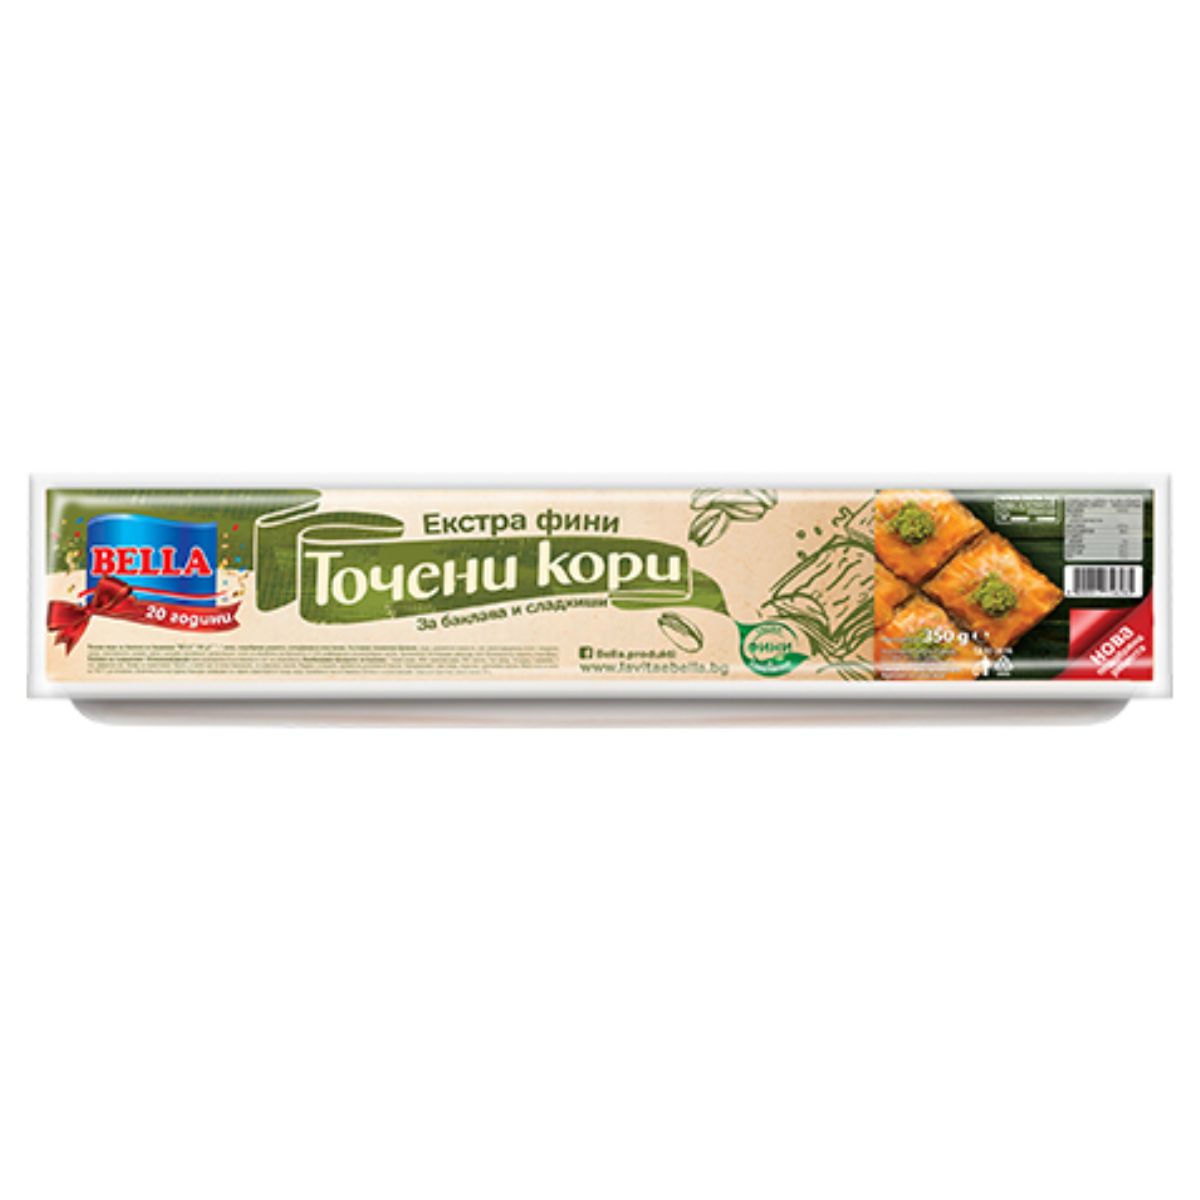 A rectangular package of Bella - Pastry for Baklava and Sweets - 400g.